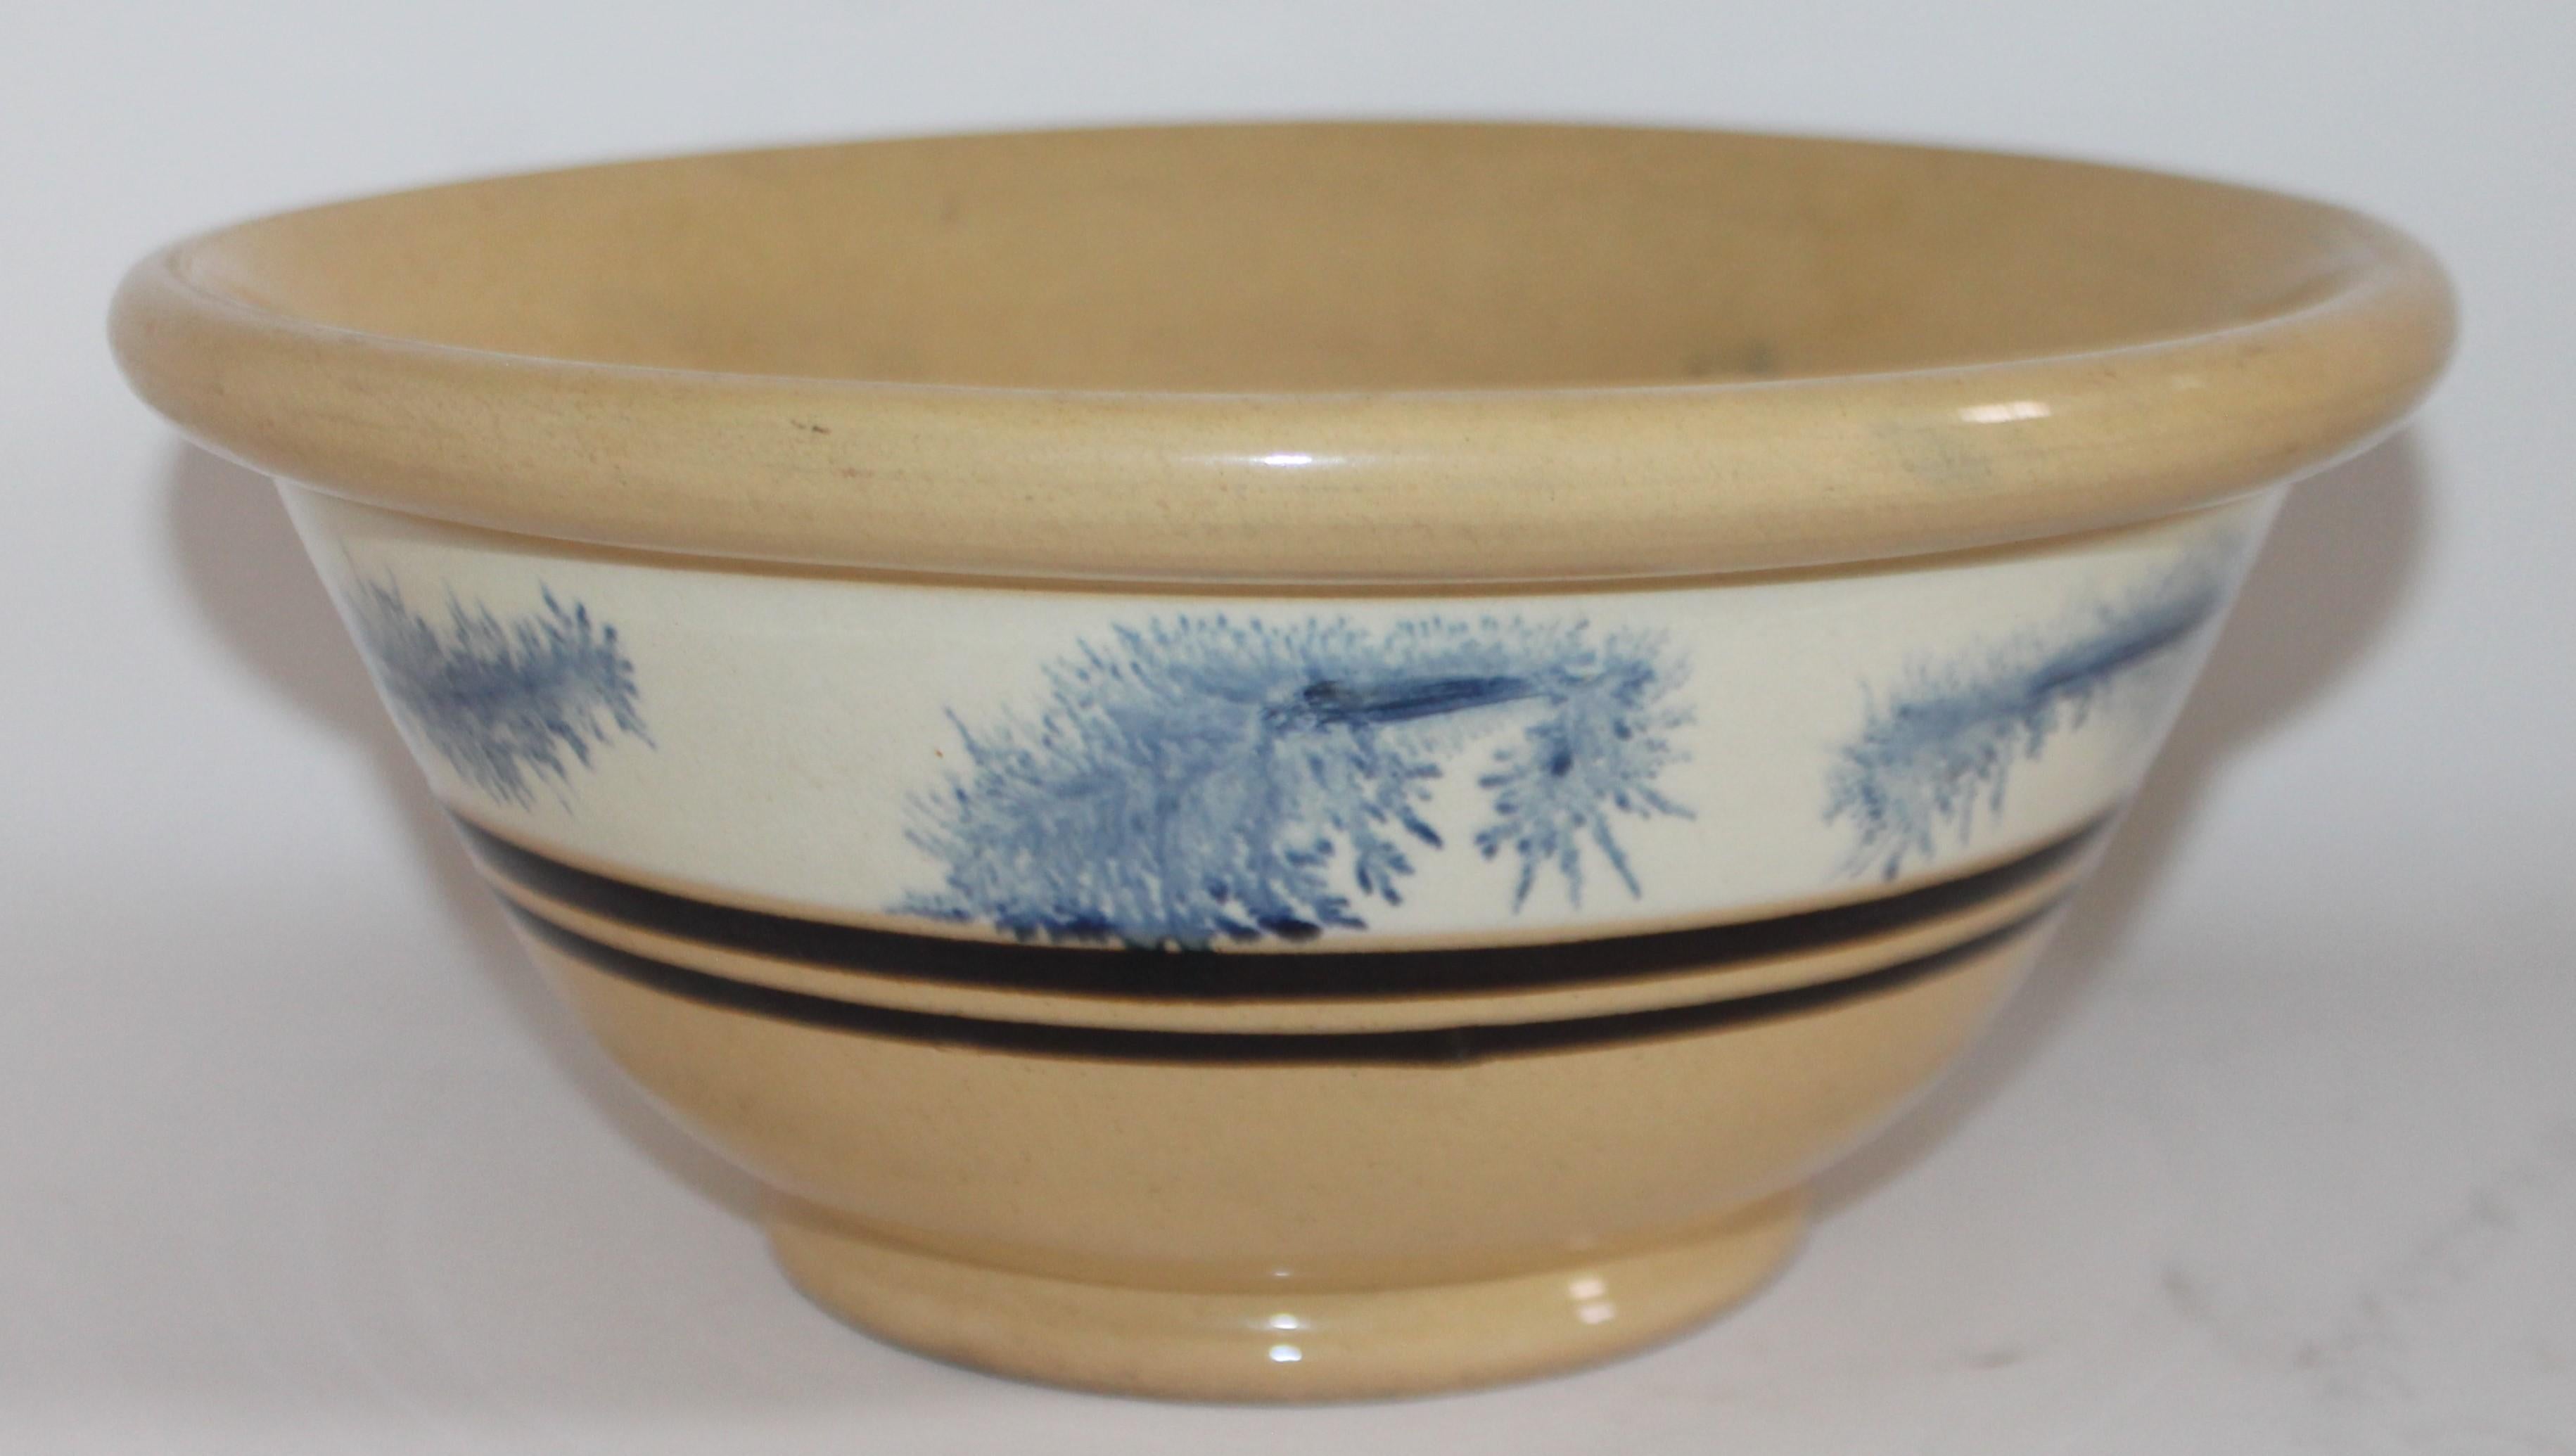 Adirondack 19th Century Yellow Ware in Seaweed Pattern Mixing Bowls, Pair For Sale